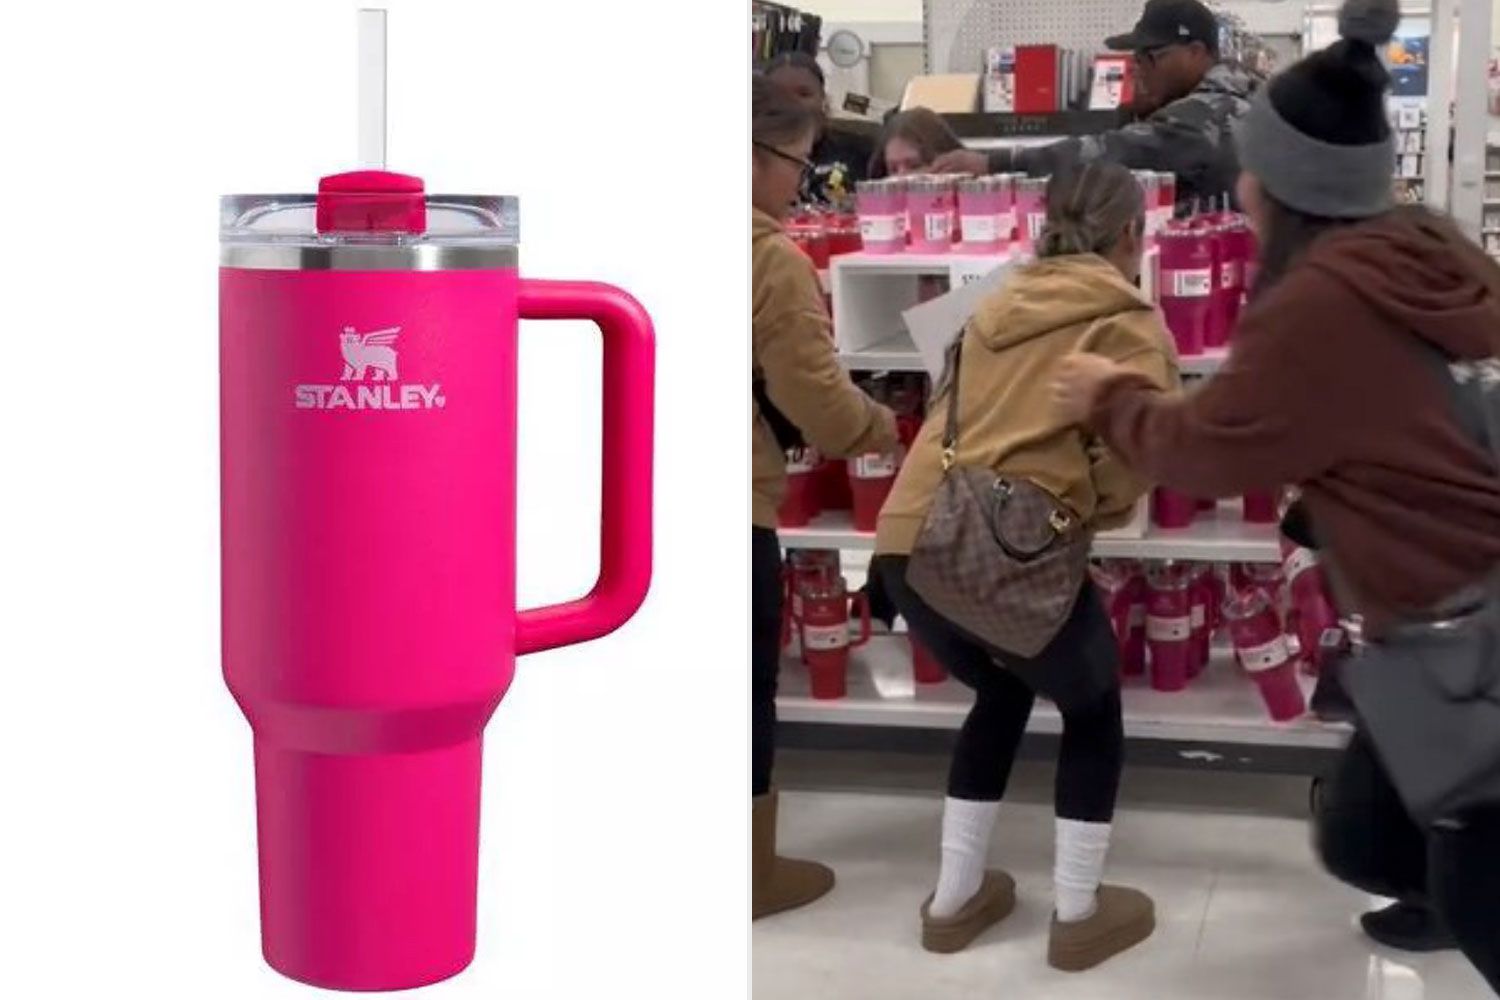 Target Shoppers Are 'Getting Trampled' for a Limited Edition Valentine's Day Stanley Cup